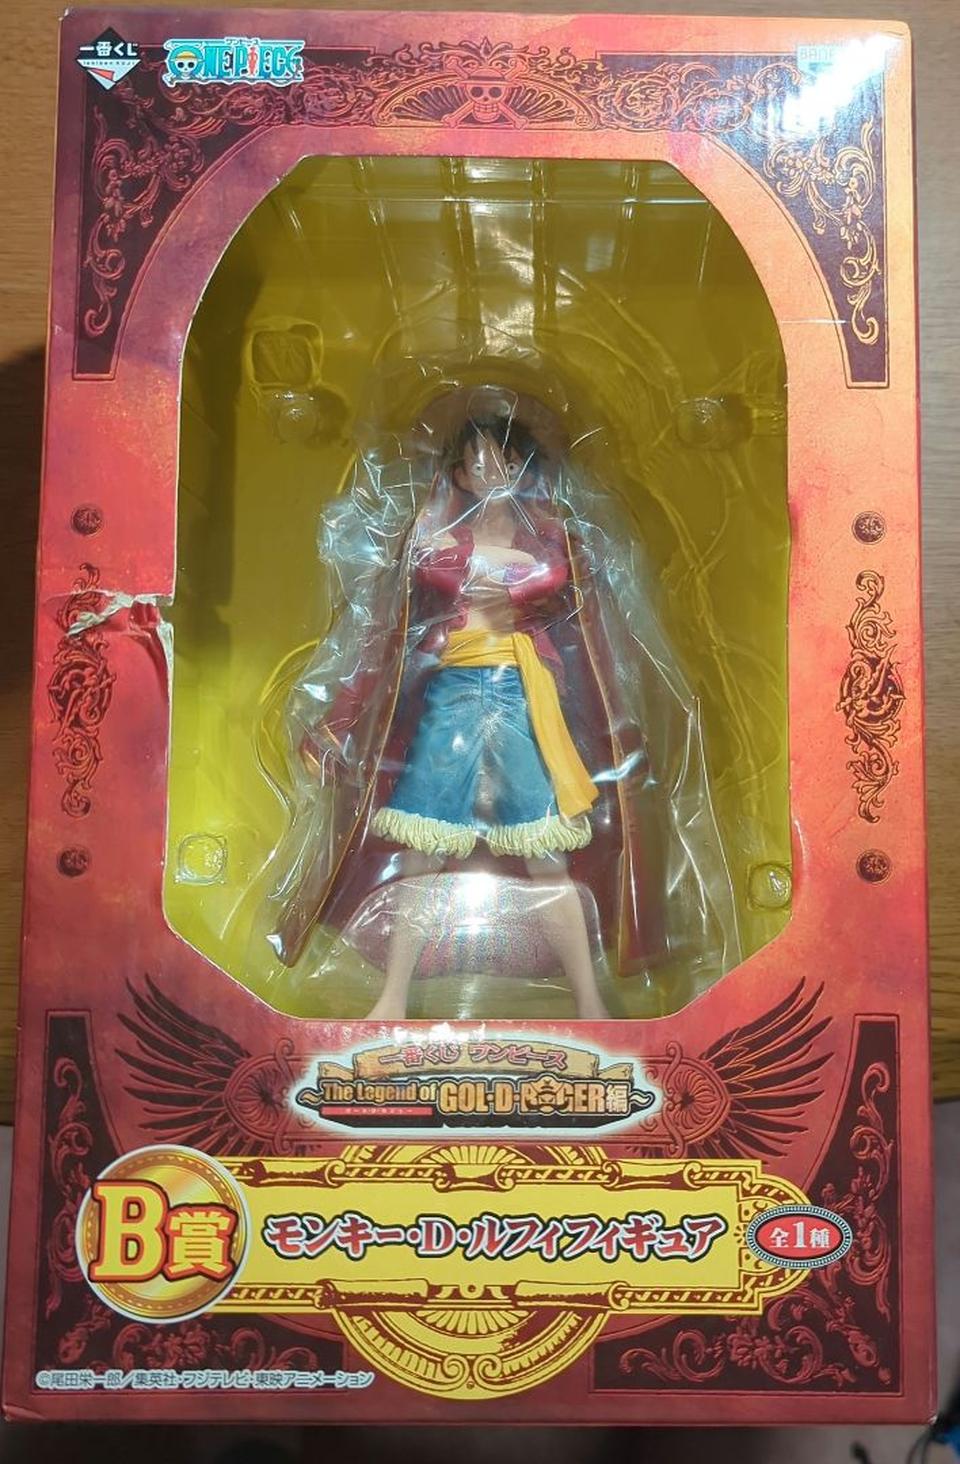 Ichiban Kuji One Piece The Legend of Gol D. Roger Luffy Prize B Figure Buy